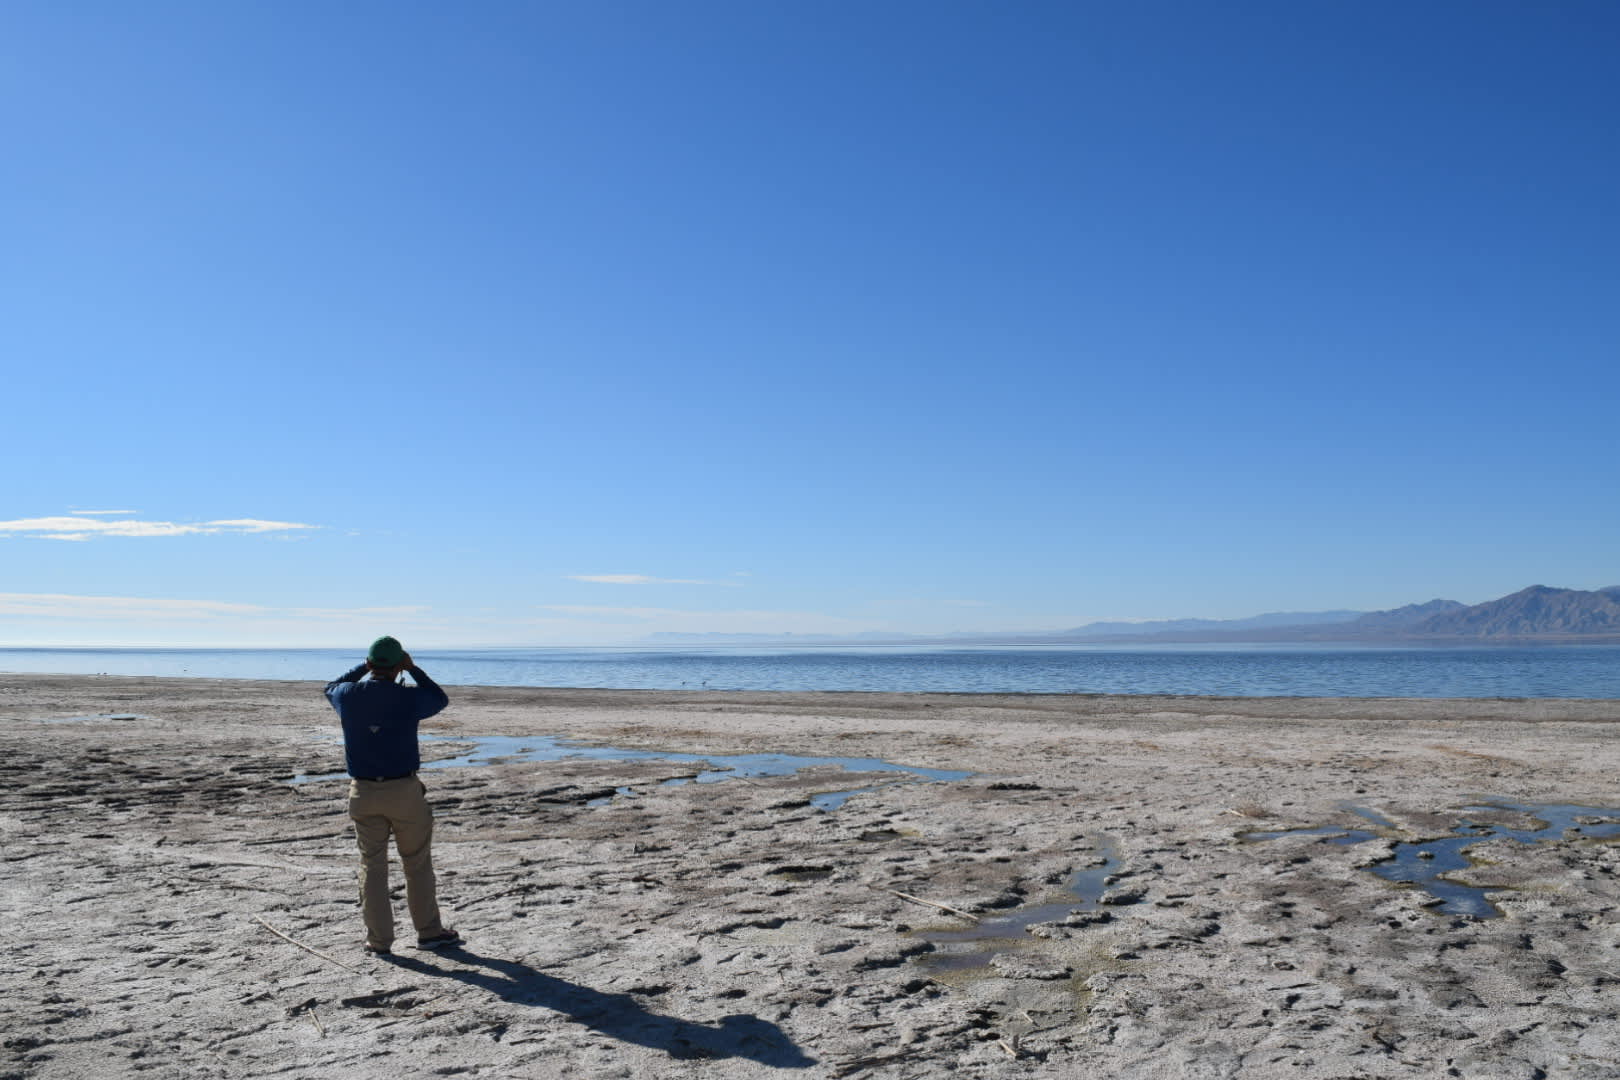 California’s Salton Sea spewing toxic fumes, creating ghost towns